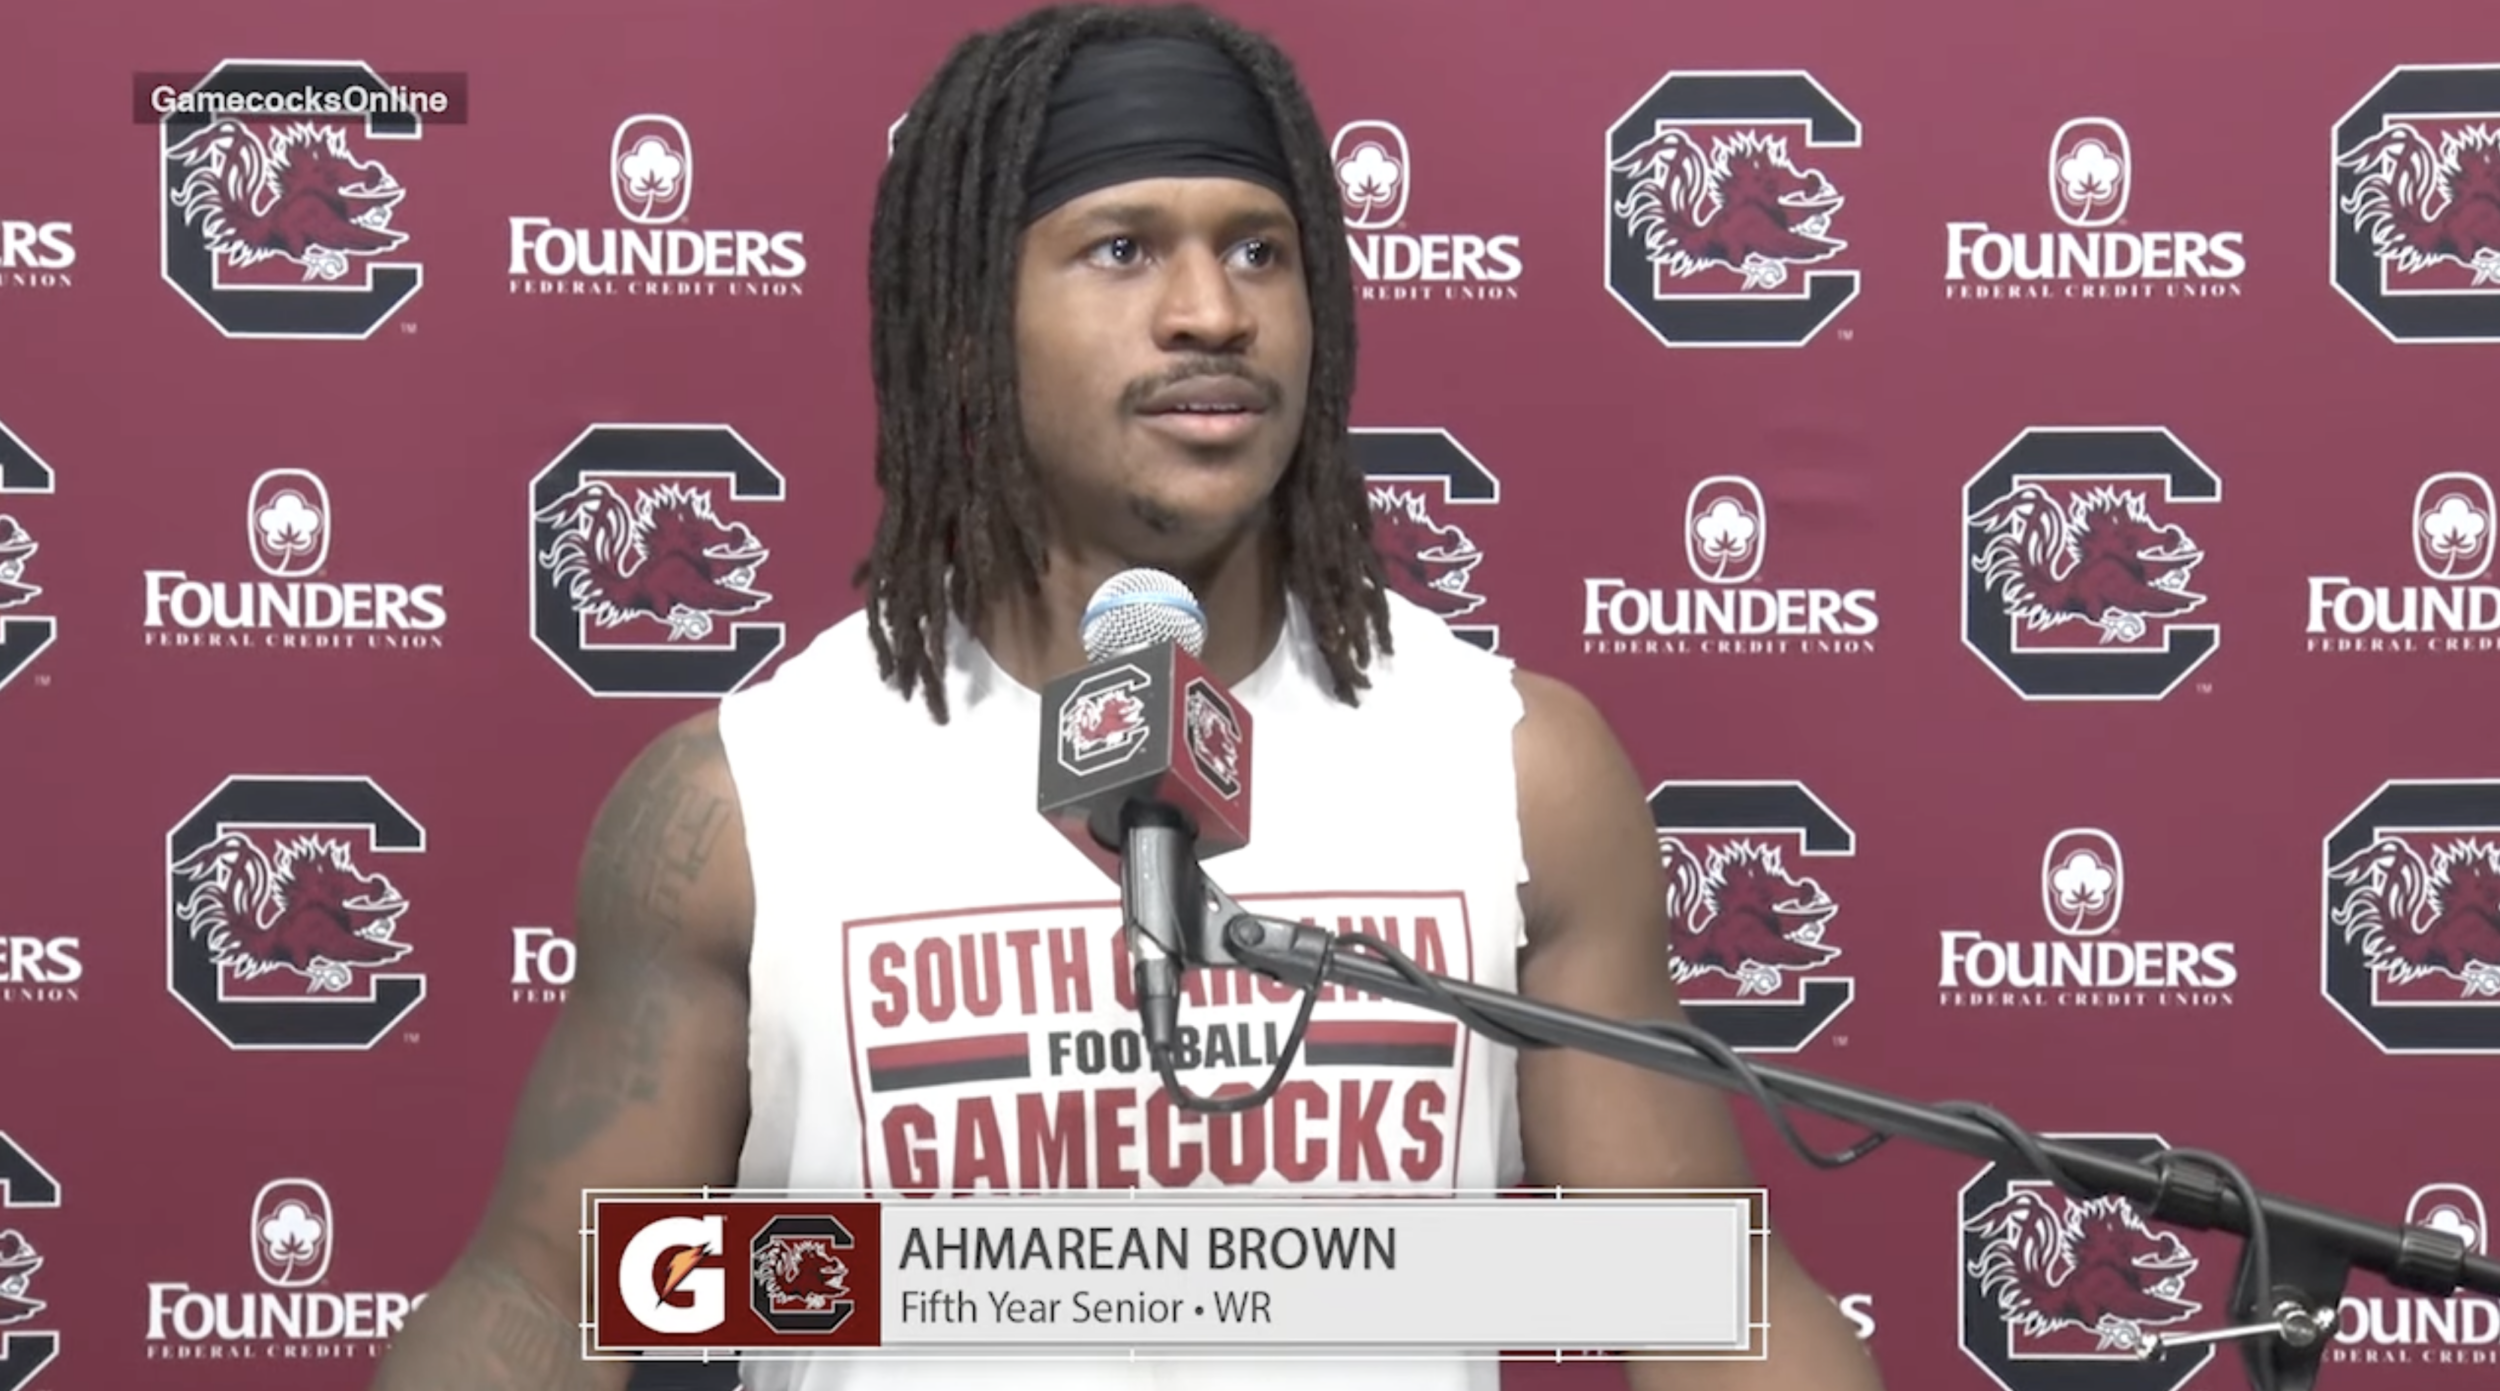 Football: Ahmarean Brown News Conference